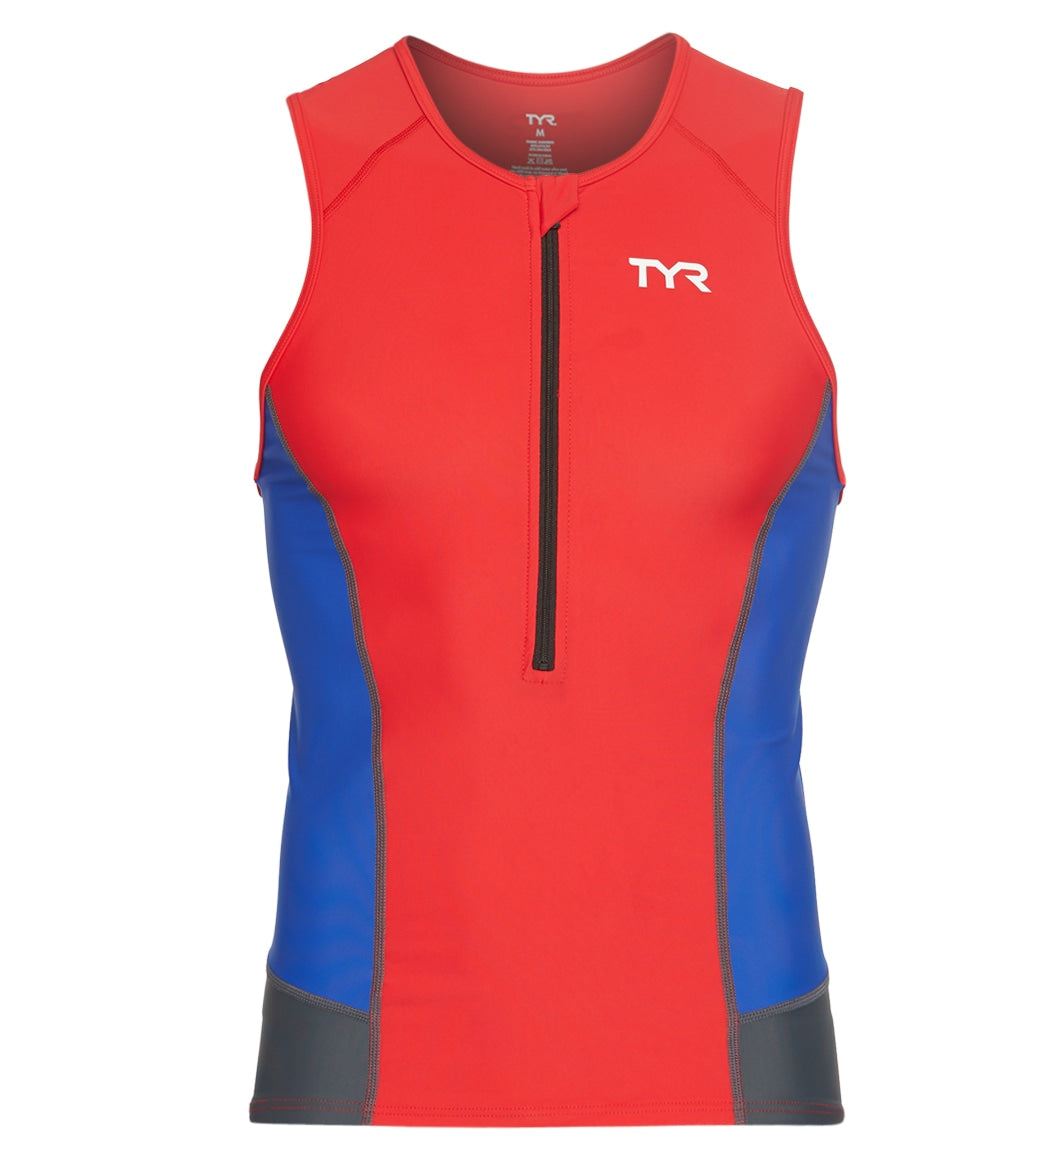 TYR Men's Competitor Singlet - Red/Blue/Grey Small Size Small - Swimoutlet.com